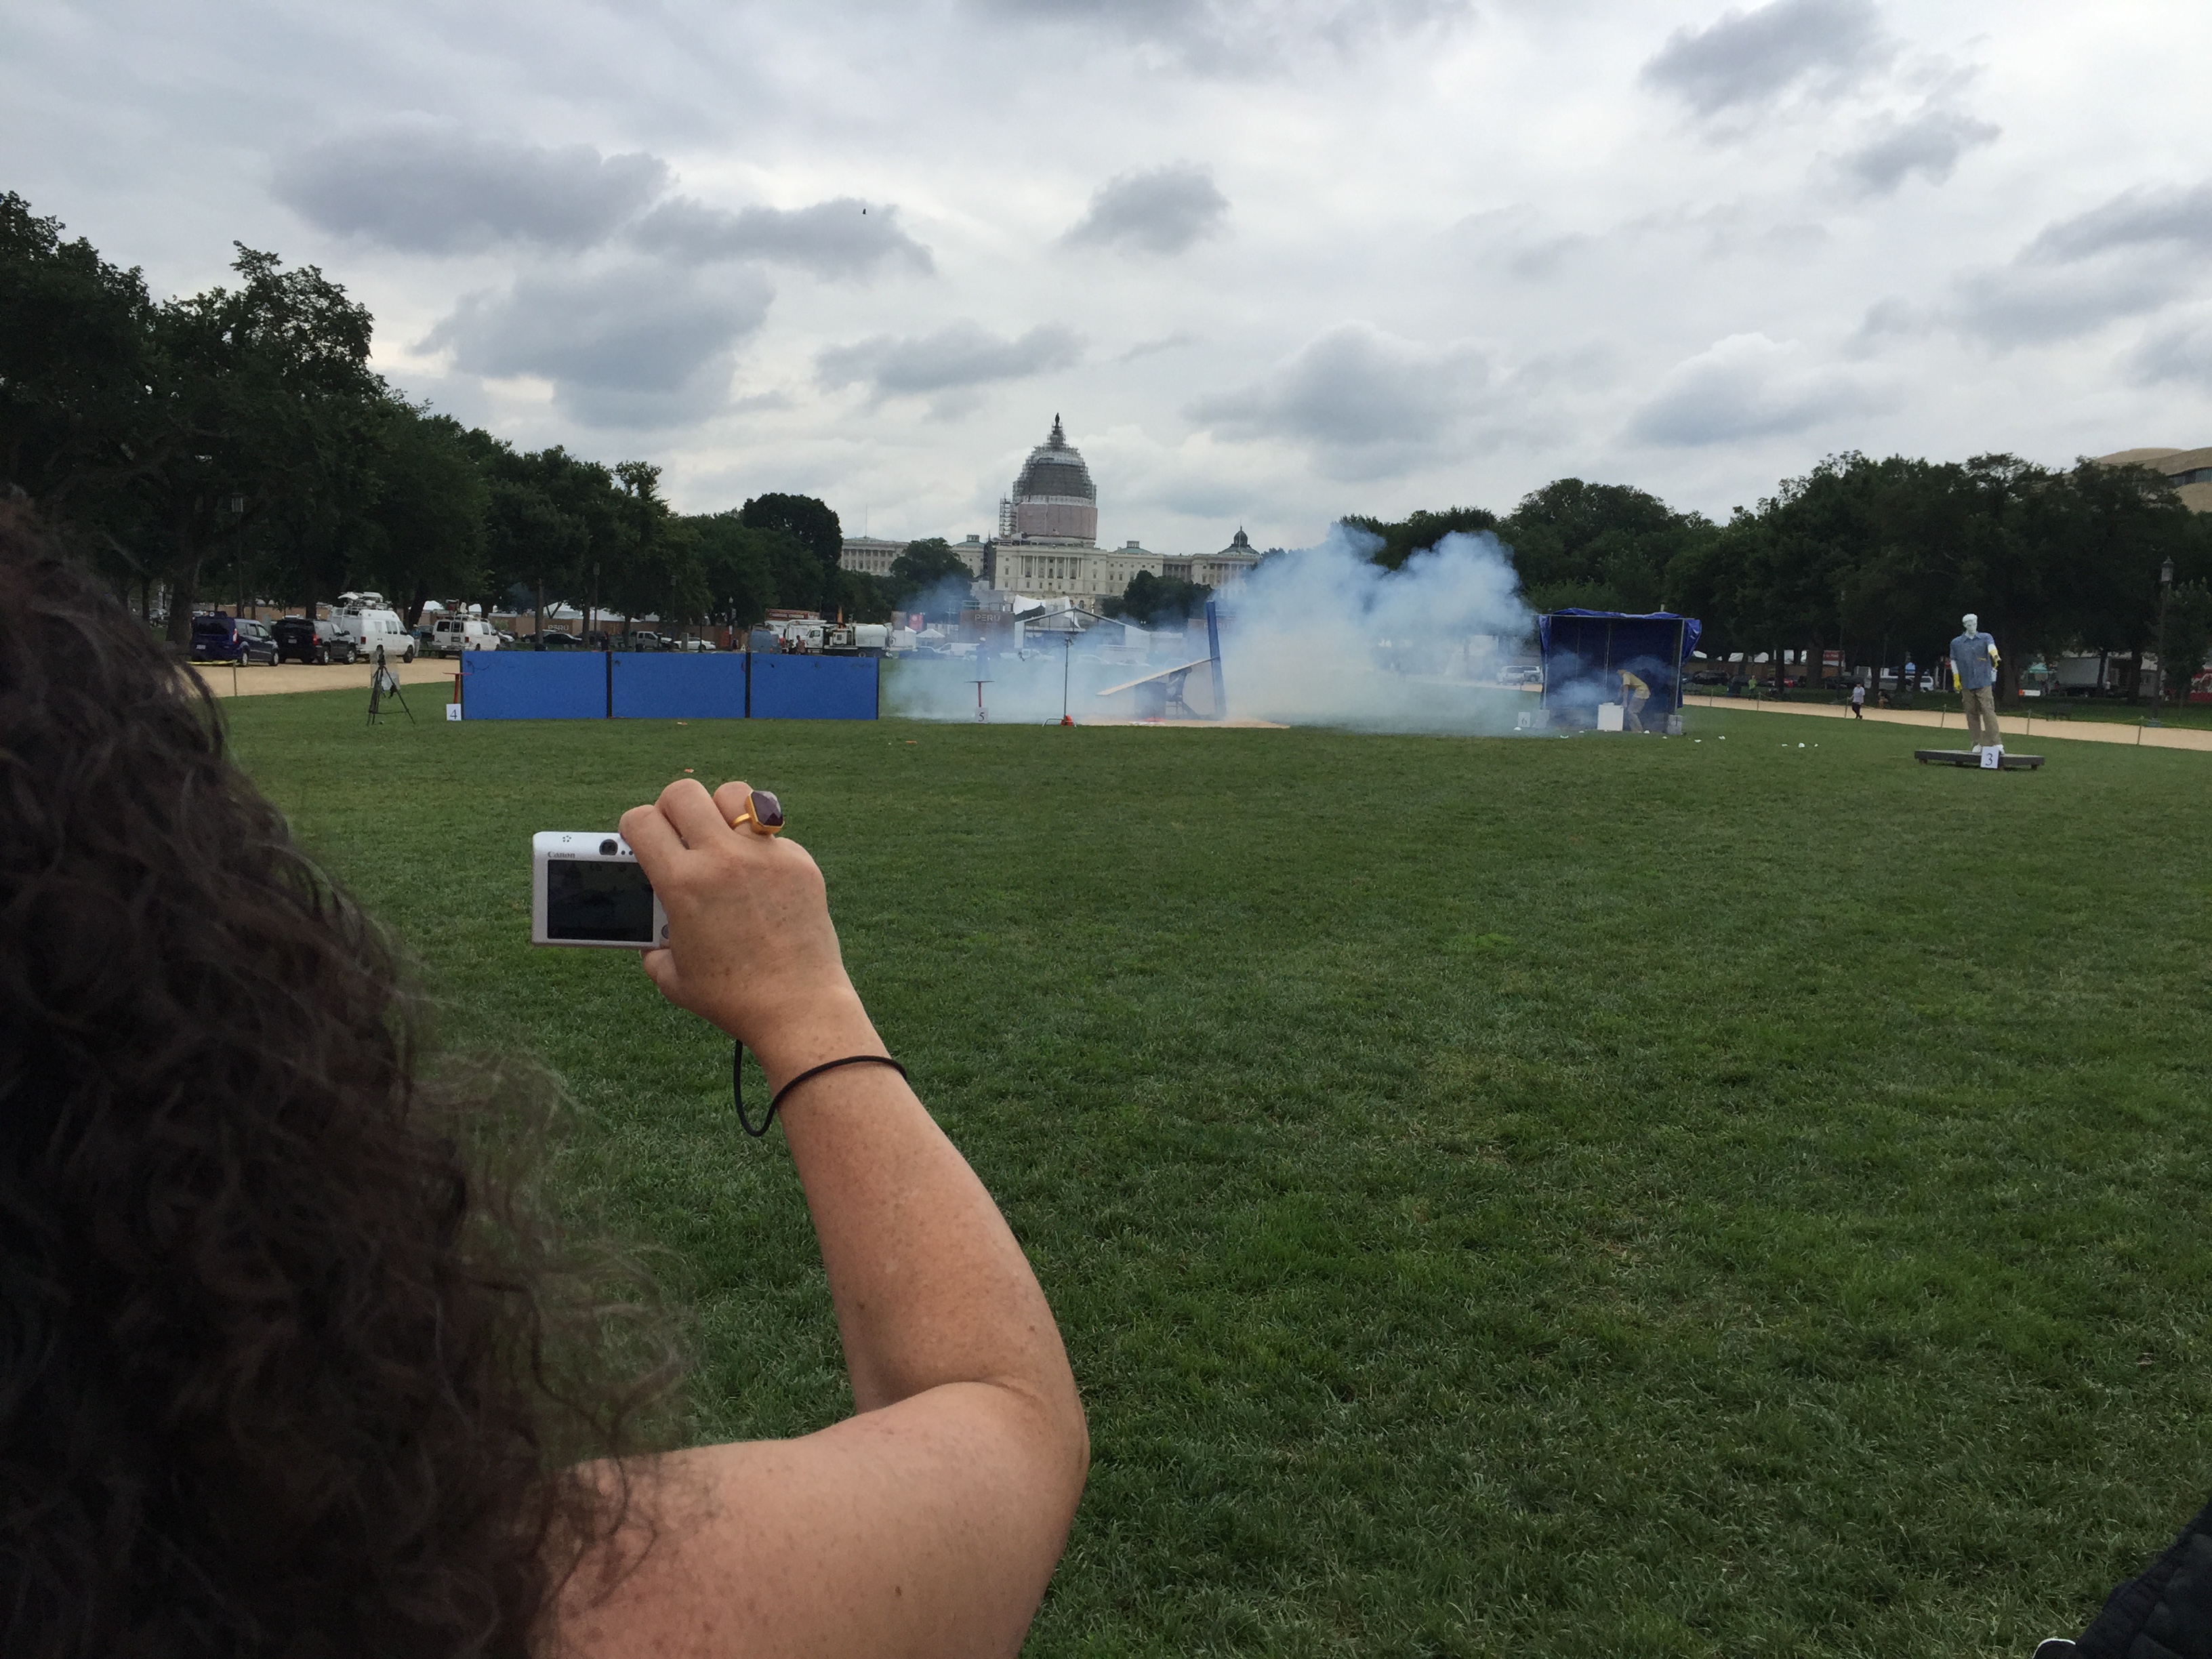 Fireworks safety vital during Independence Day celebrations (Photos)